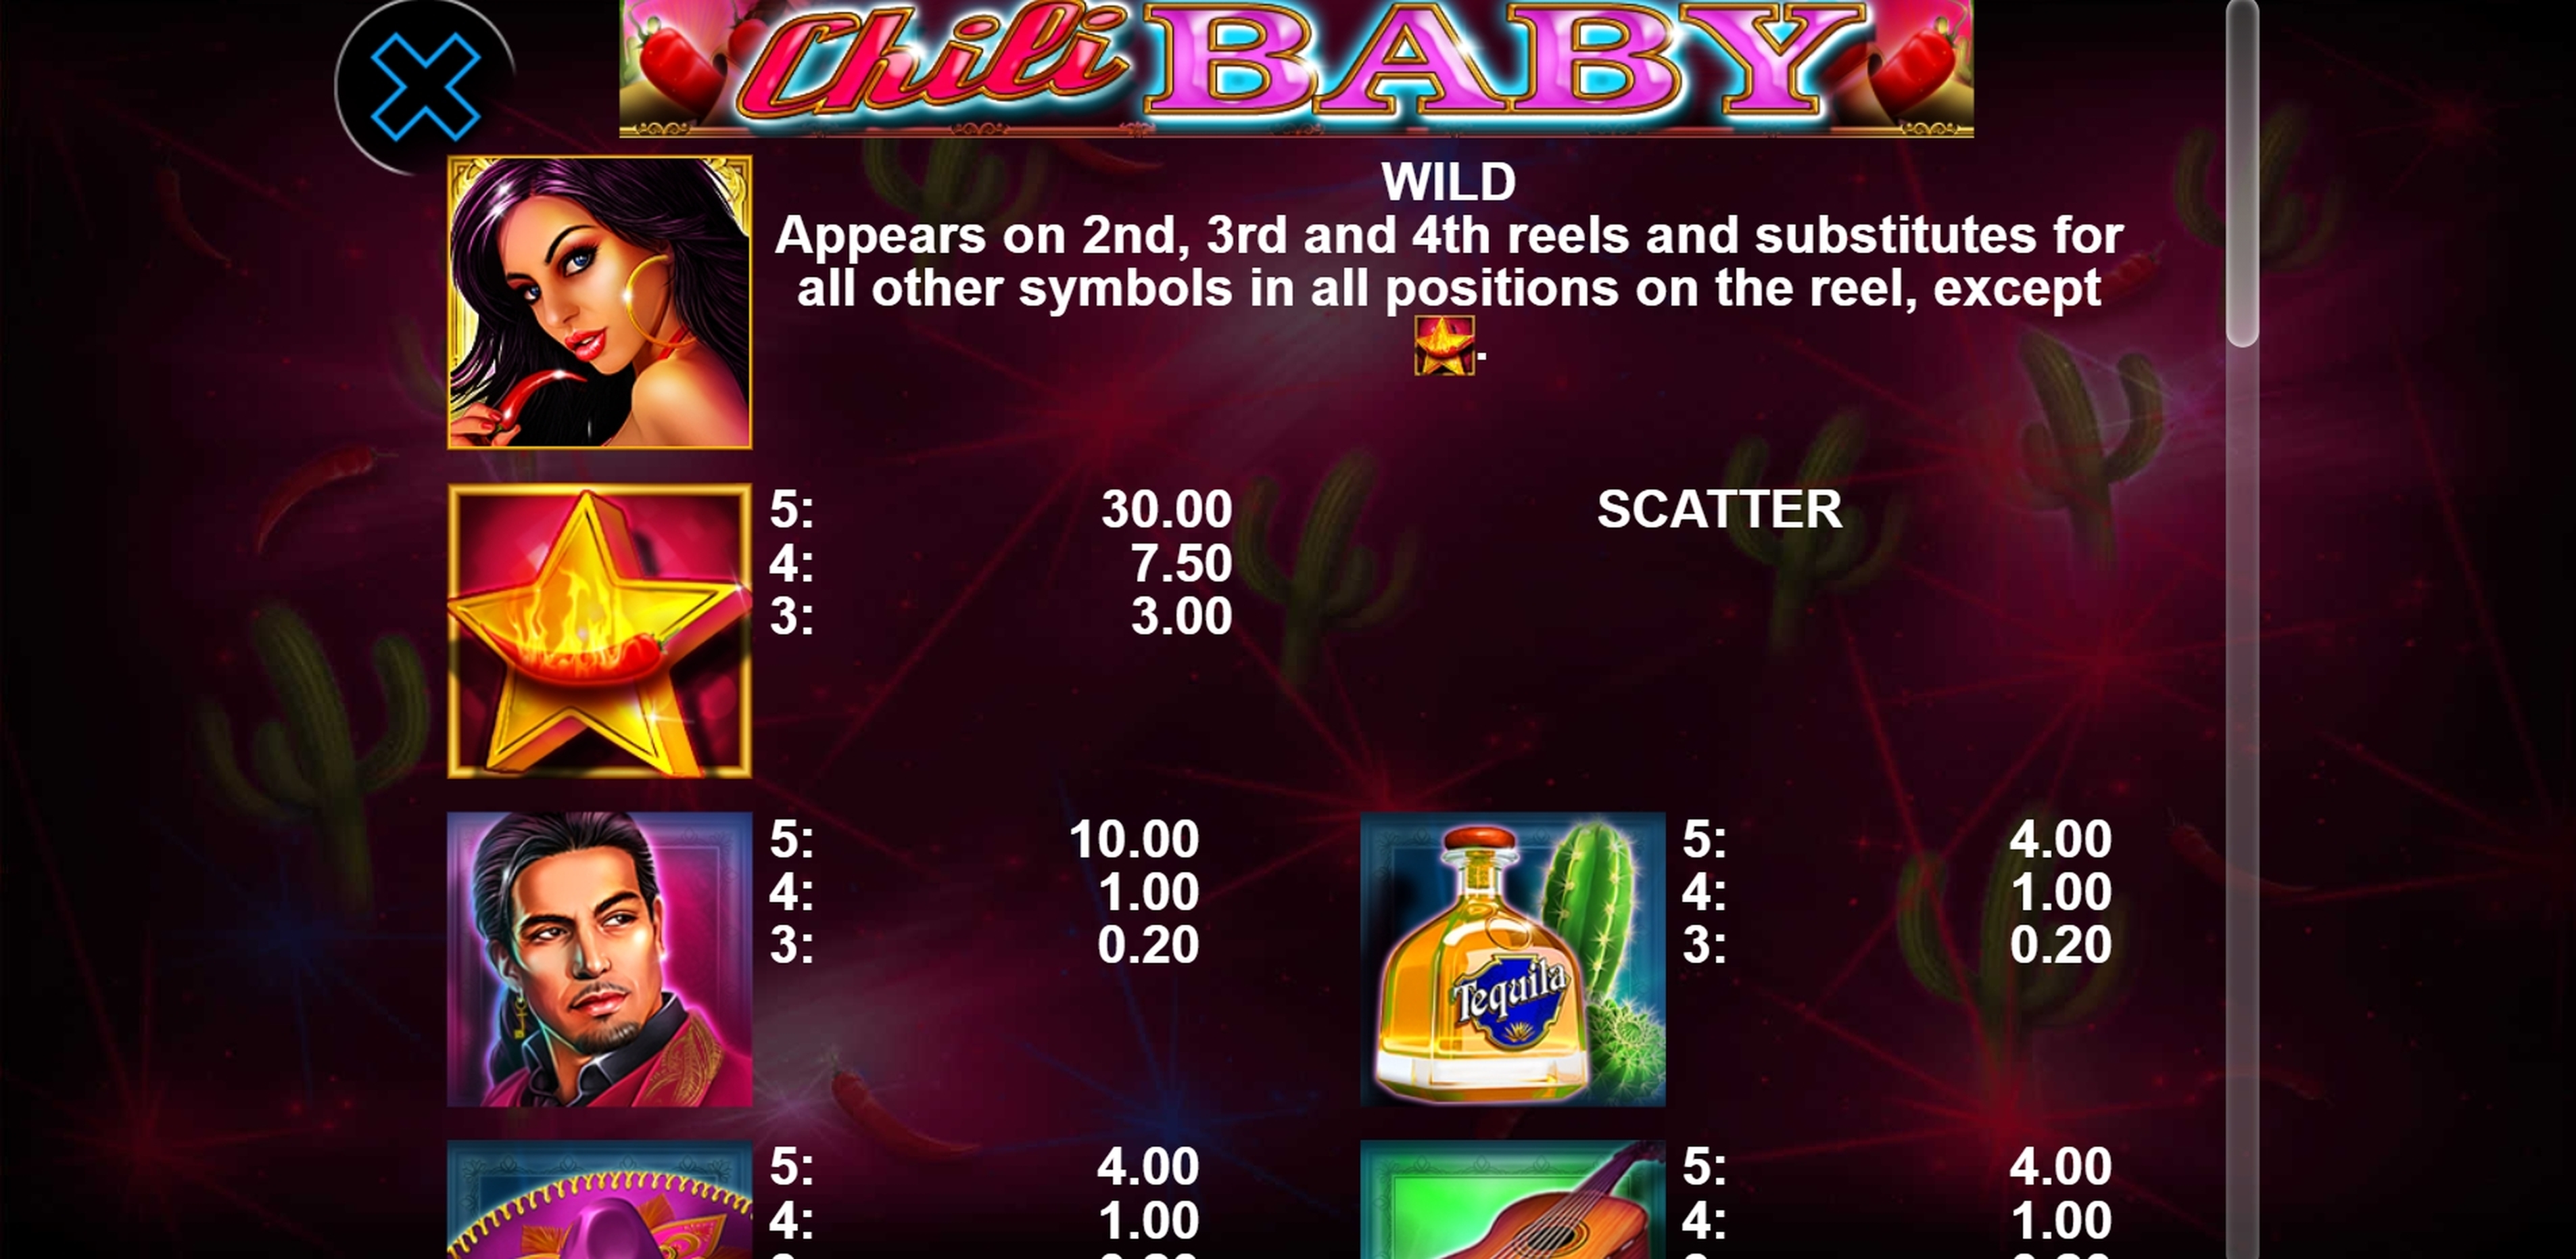 Info of Chili Baby Slot Game by casino technology